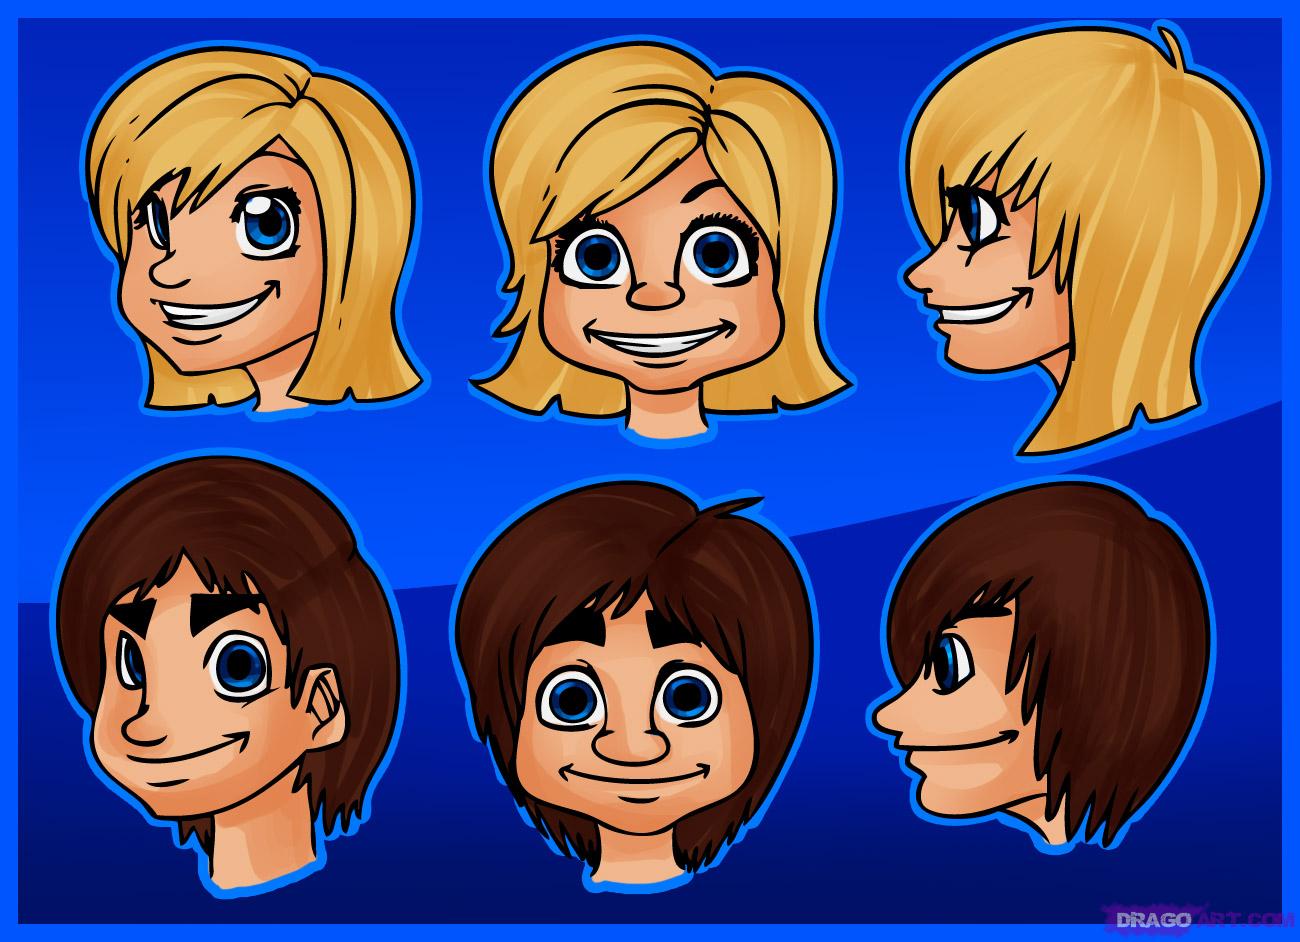 How to Draw Cartoon Faces, Step by Step, Faces, People, FREE 